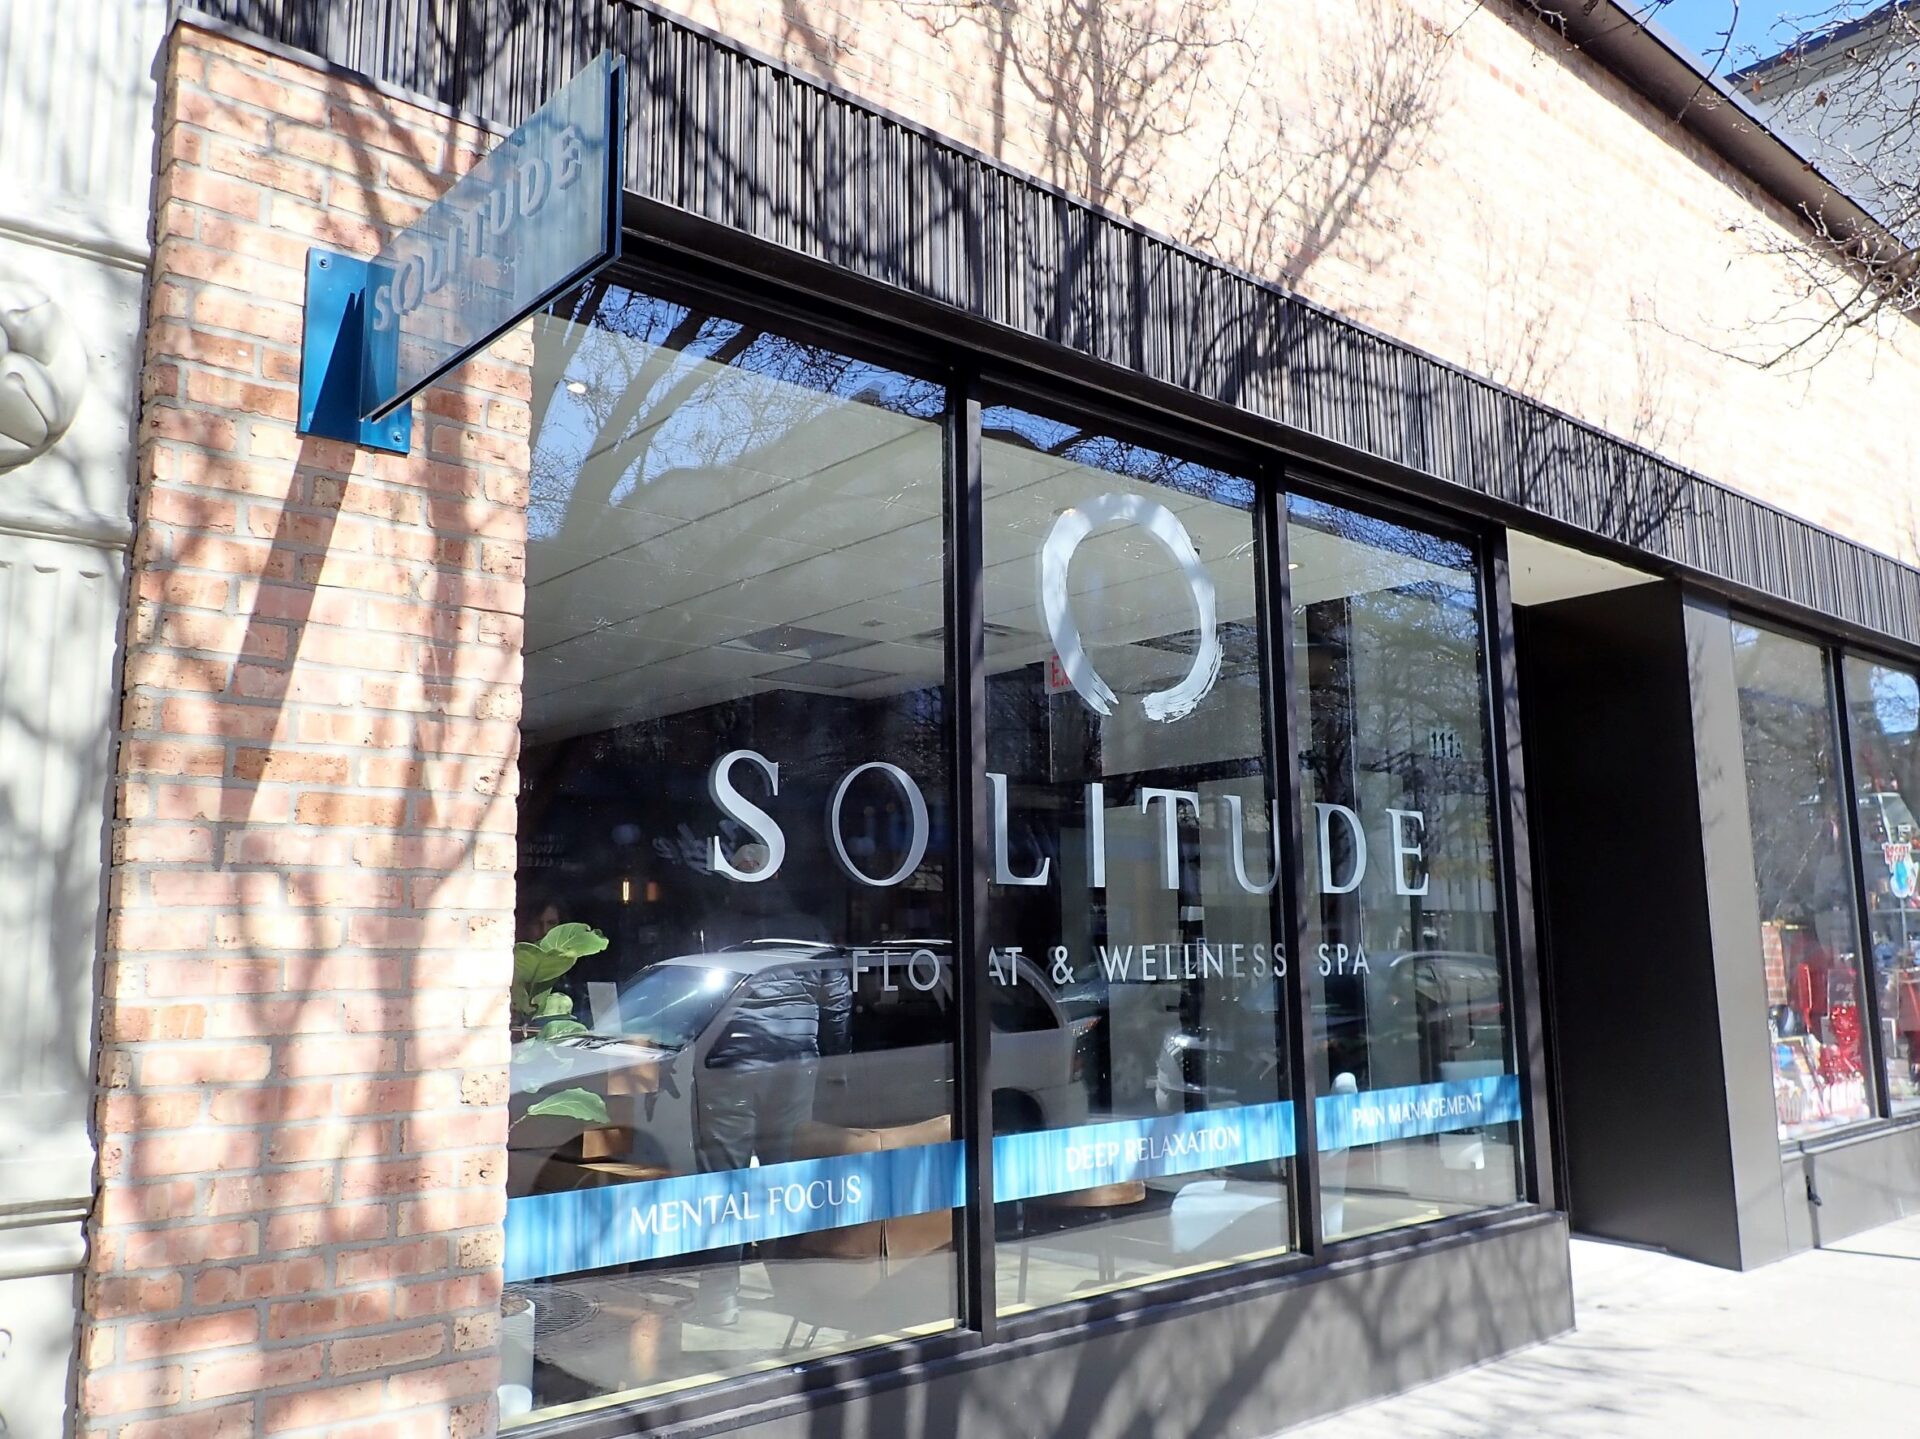 Indoor things to do in Traverse City: Enjoy a float at Solitude Float and Wellness Spa!